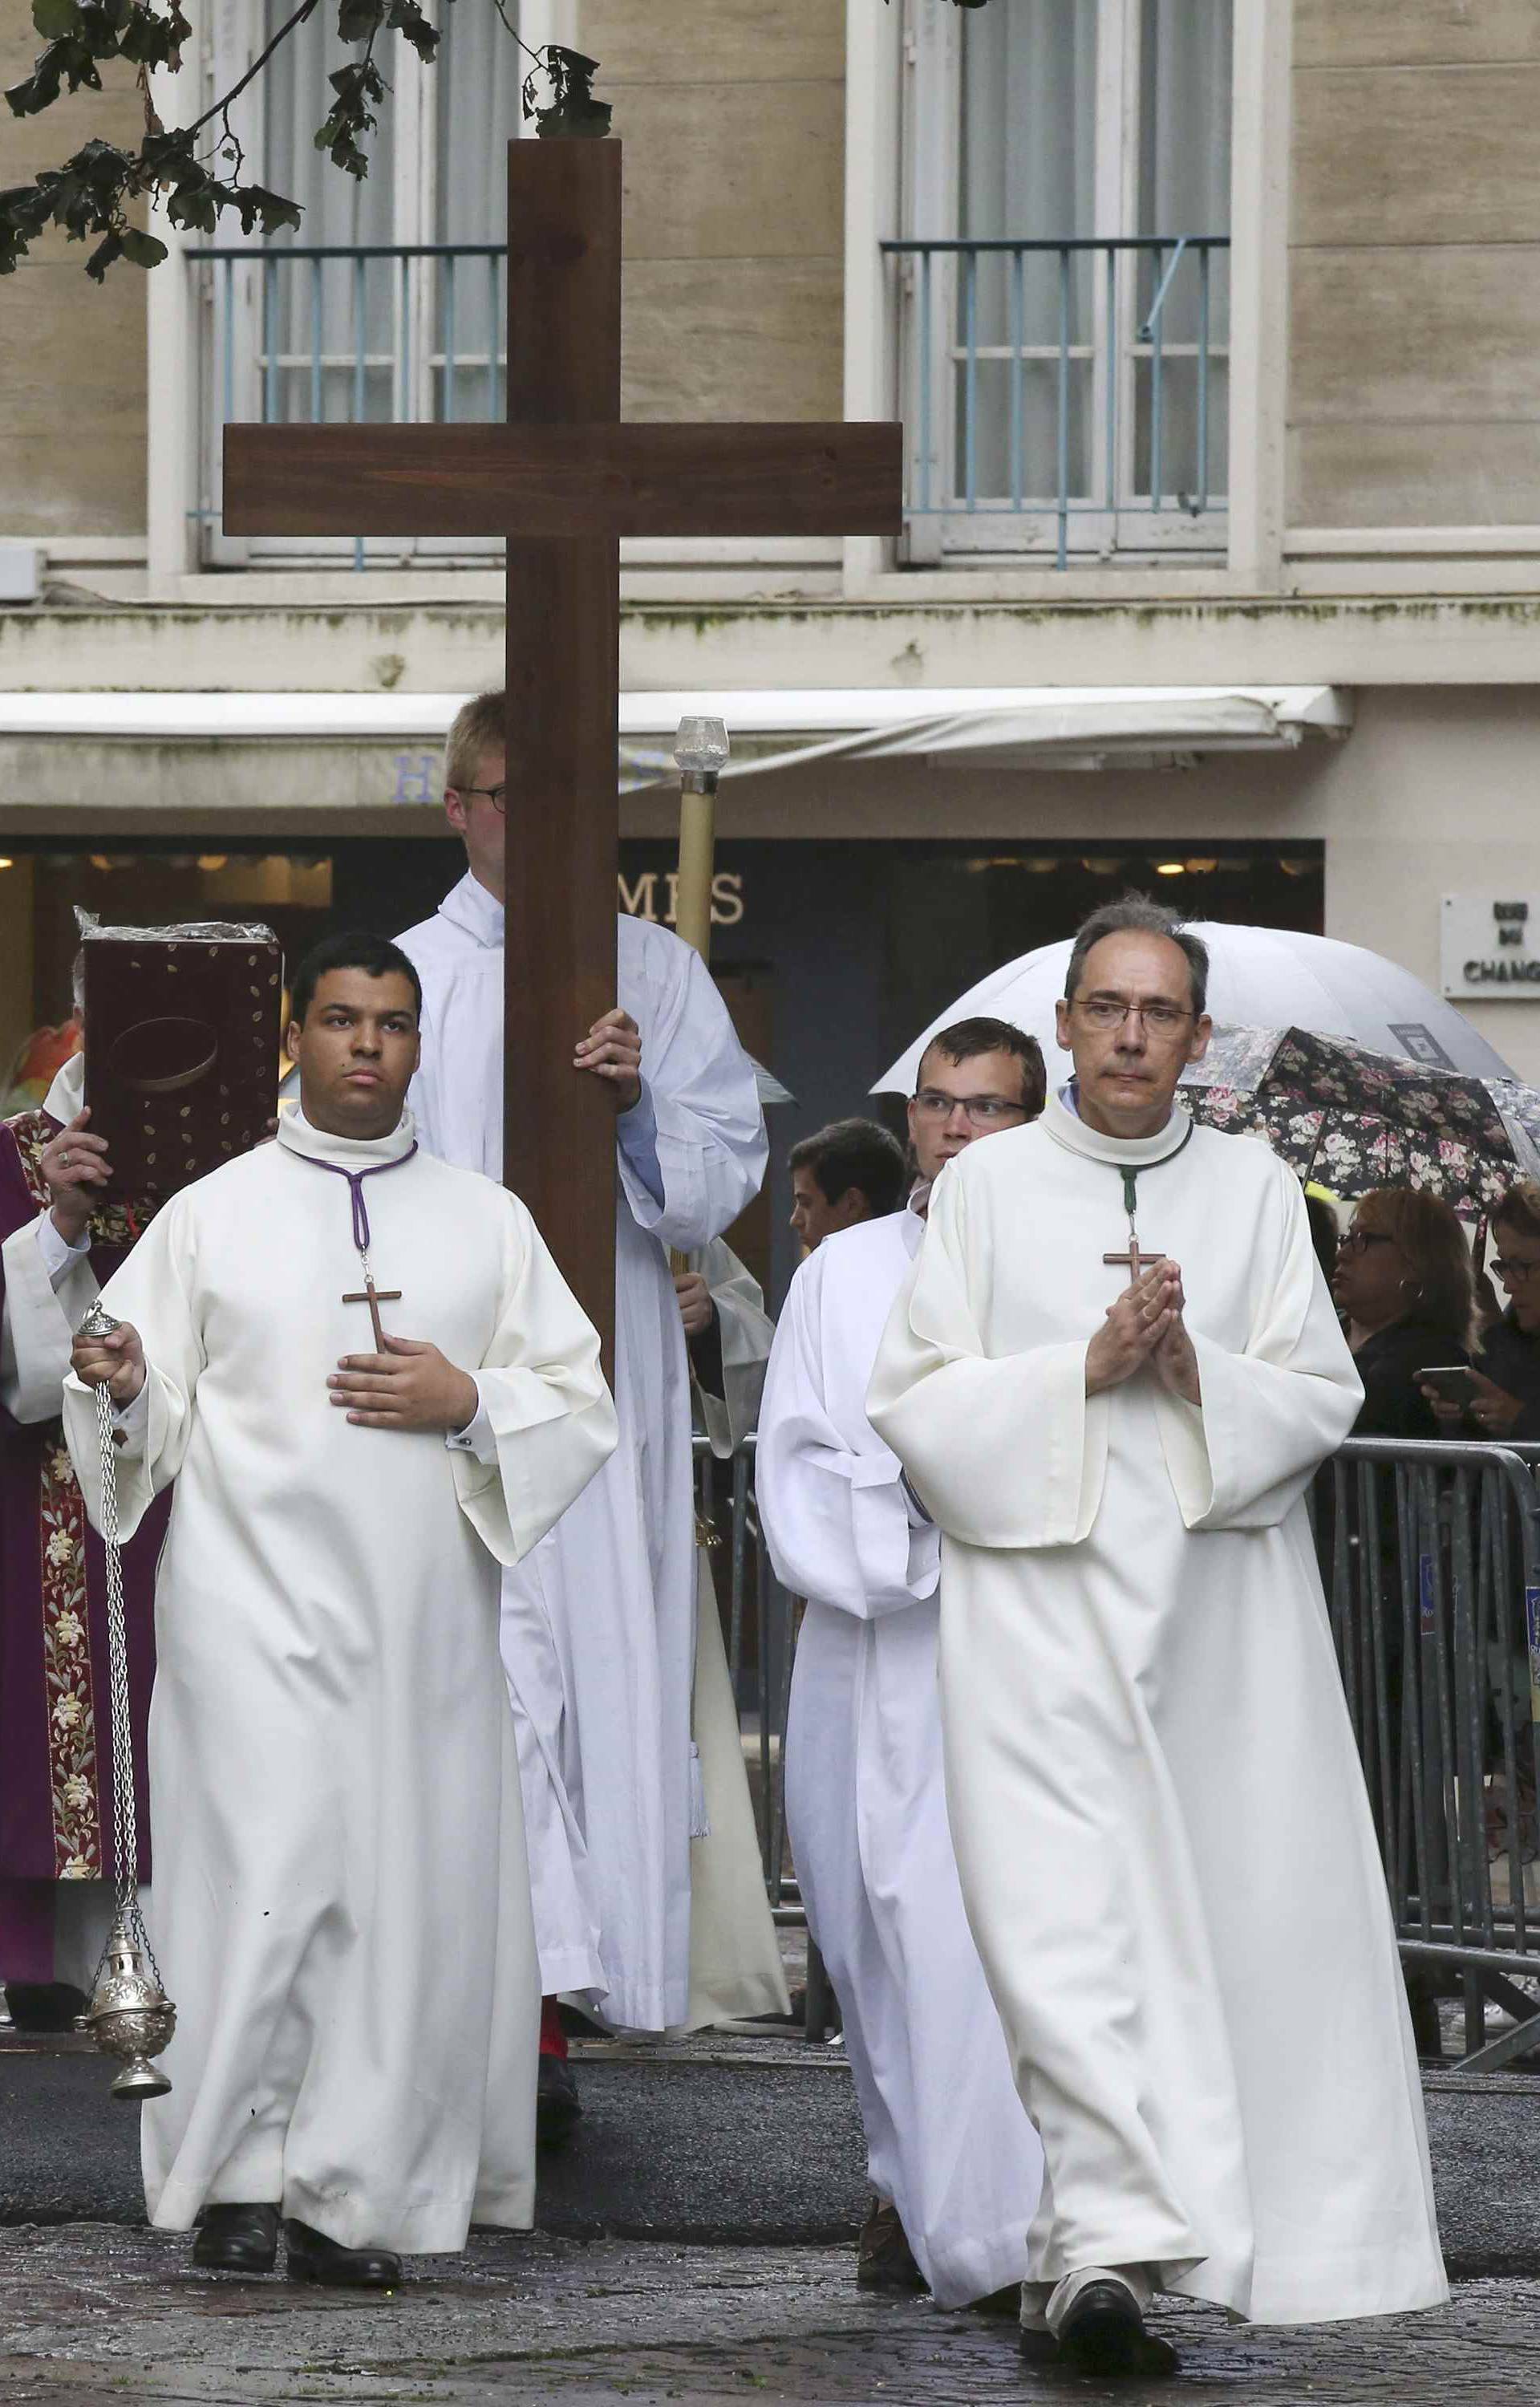 Priests lead a procession for a funeral service for slain French parish priest Father Jacques Hamel at the Cathedral in Rouen